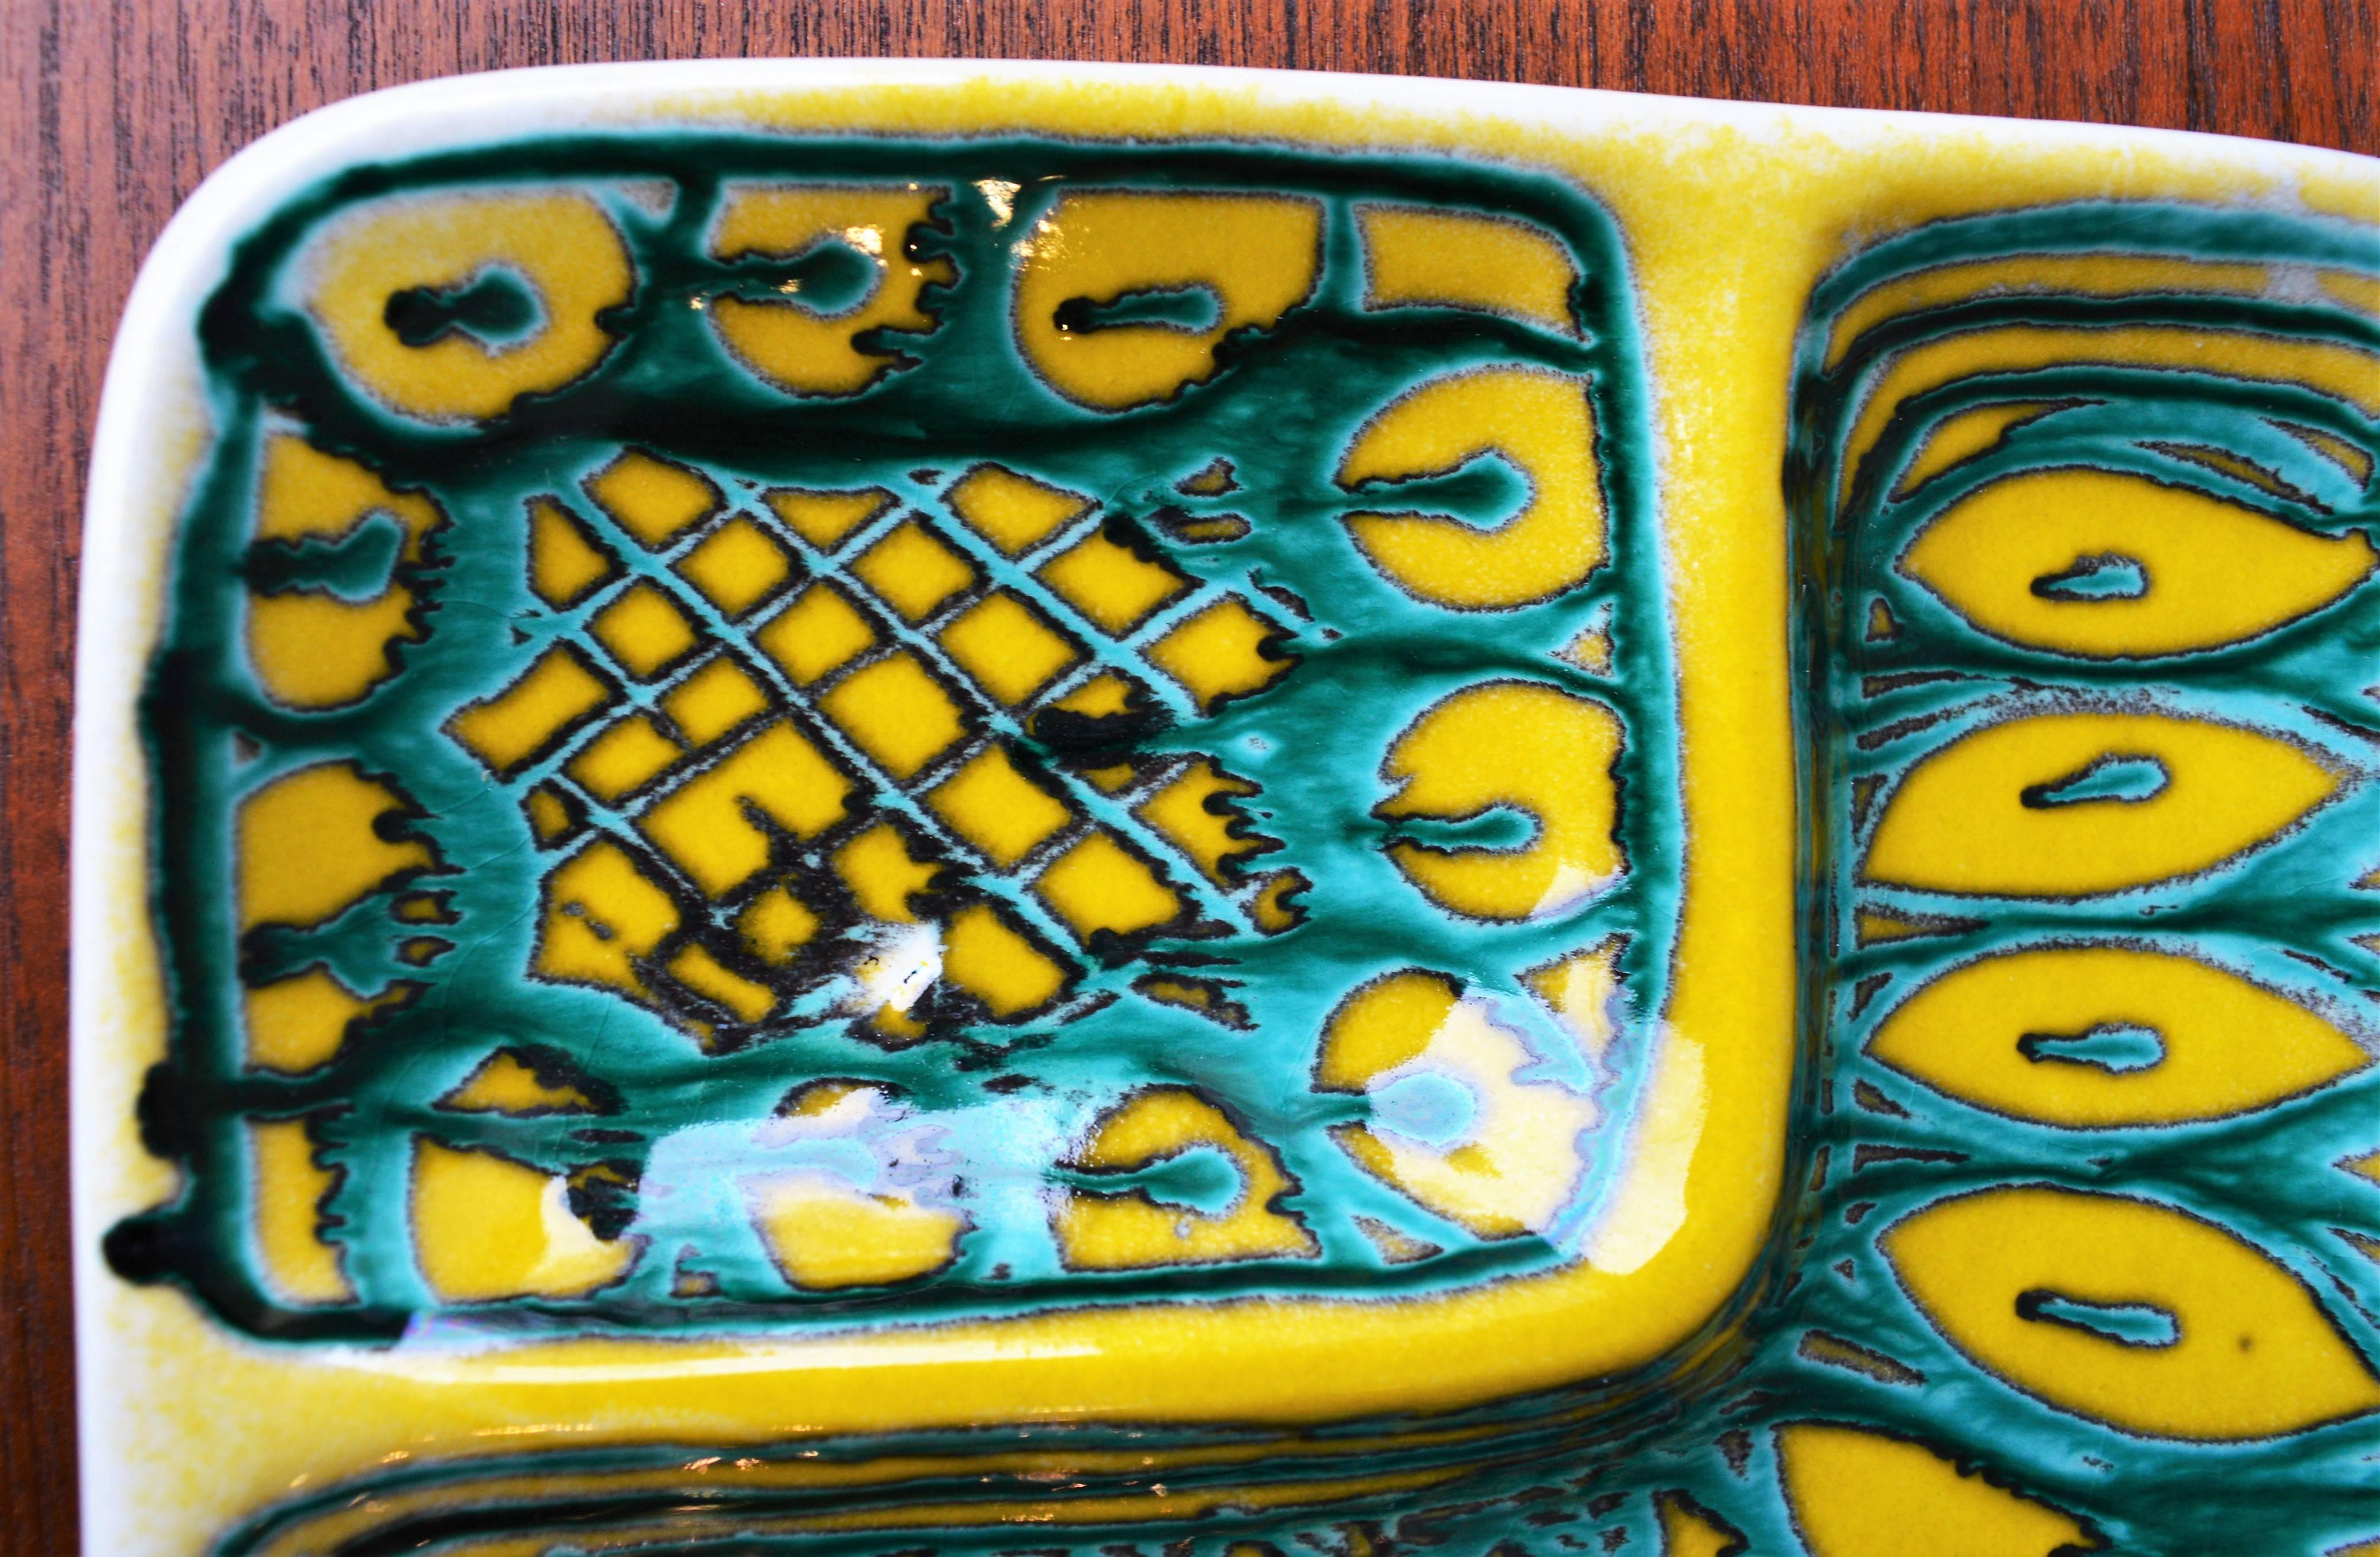 Mid-Century Modern Italian Alessio Tasca Hand-Painted Ceramic Dish, Turquoise and Yellow For Sale